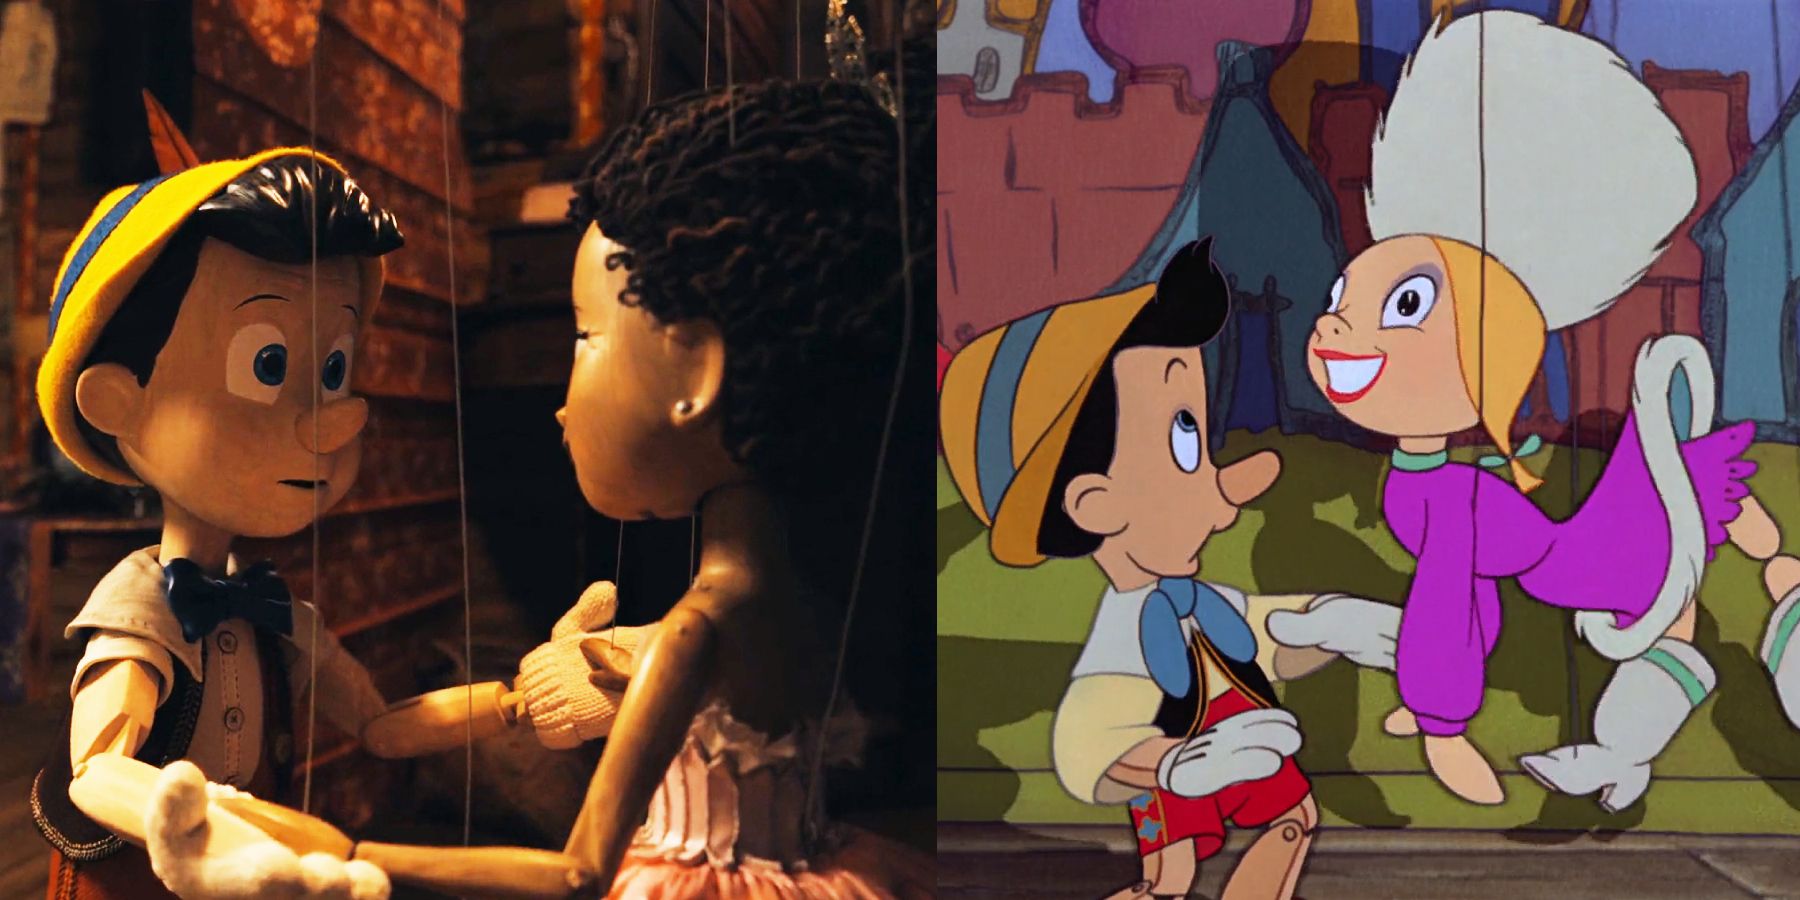 Pinocchio and Sabina in the remake and Pinocchio scared of a female puppet in the original